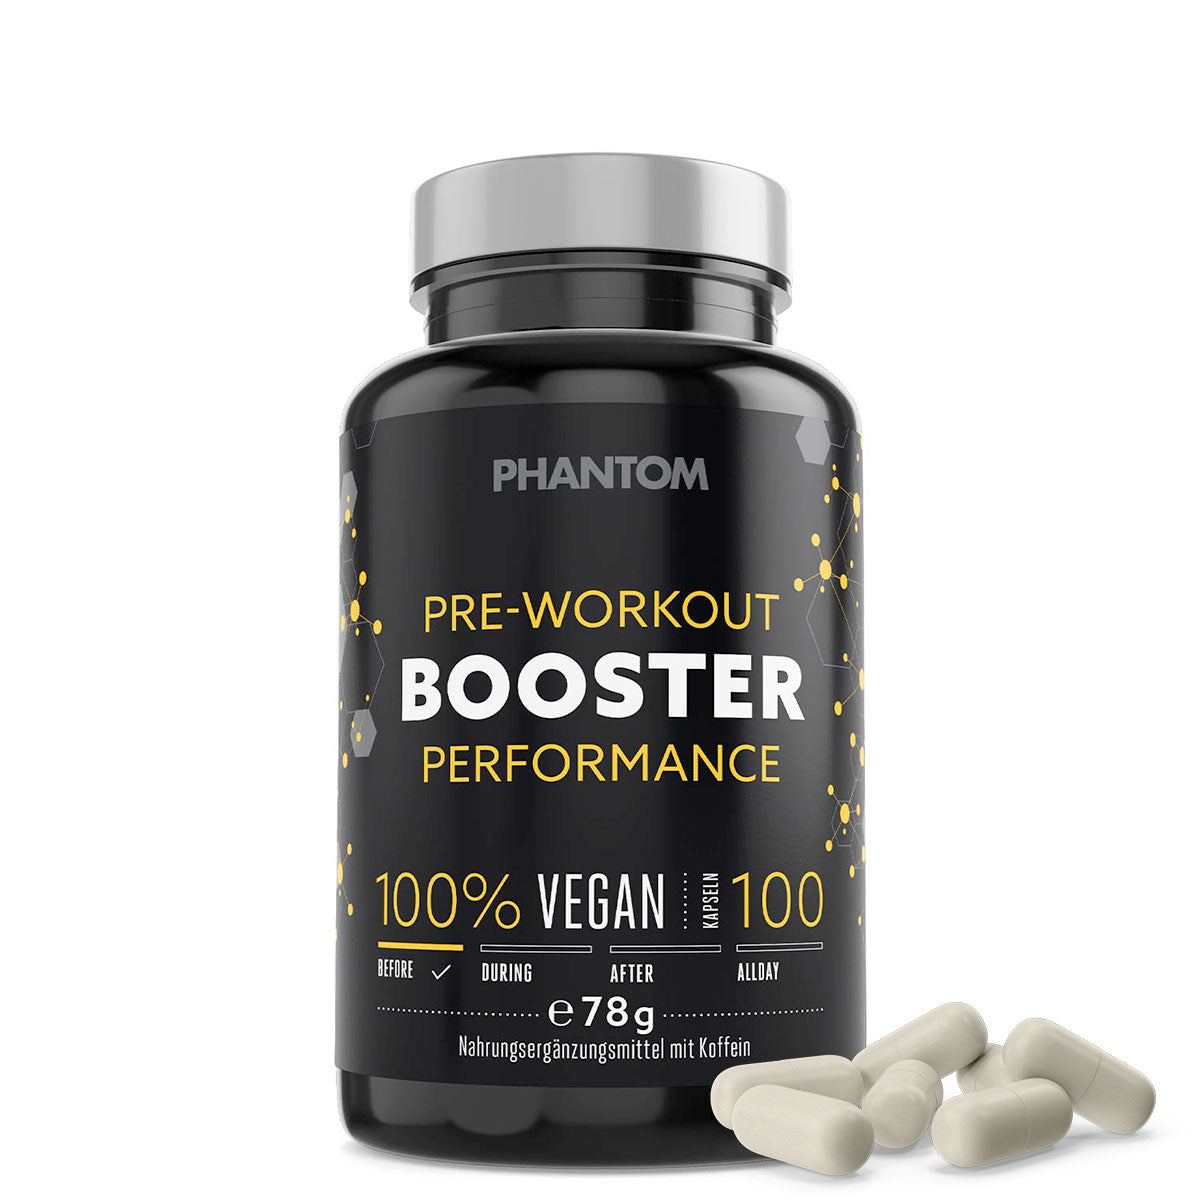 Phantom pre-workout booster in capsule form for more focus and power in martial arts.